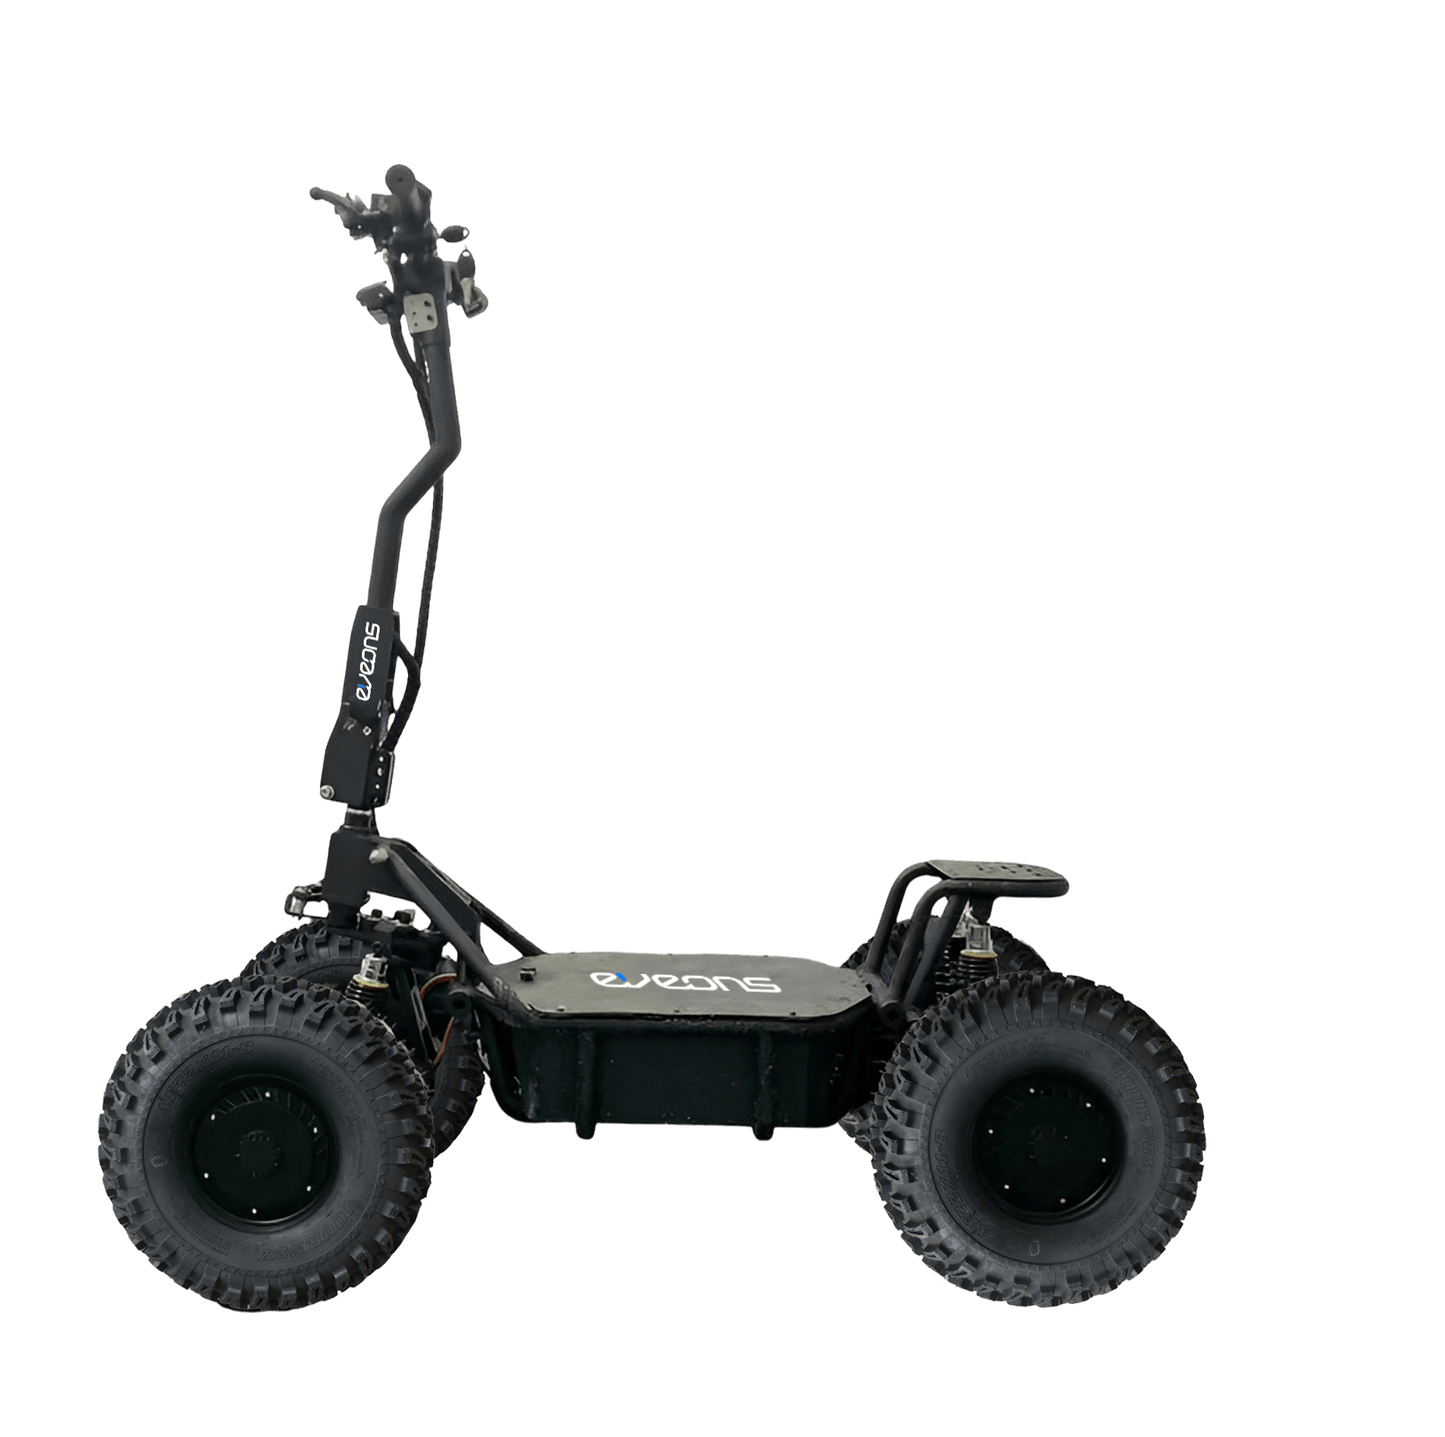 I Hercules Advanced Design, Enhanced Suspension, and Extended Capabilities - COOLBABY